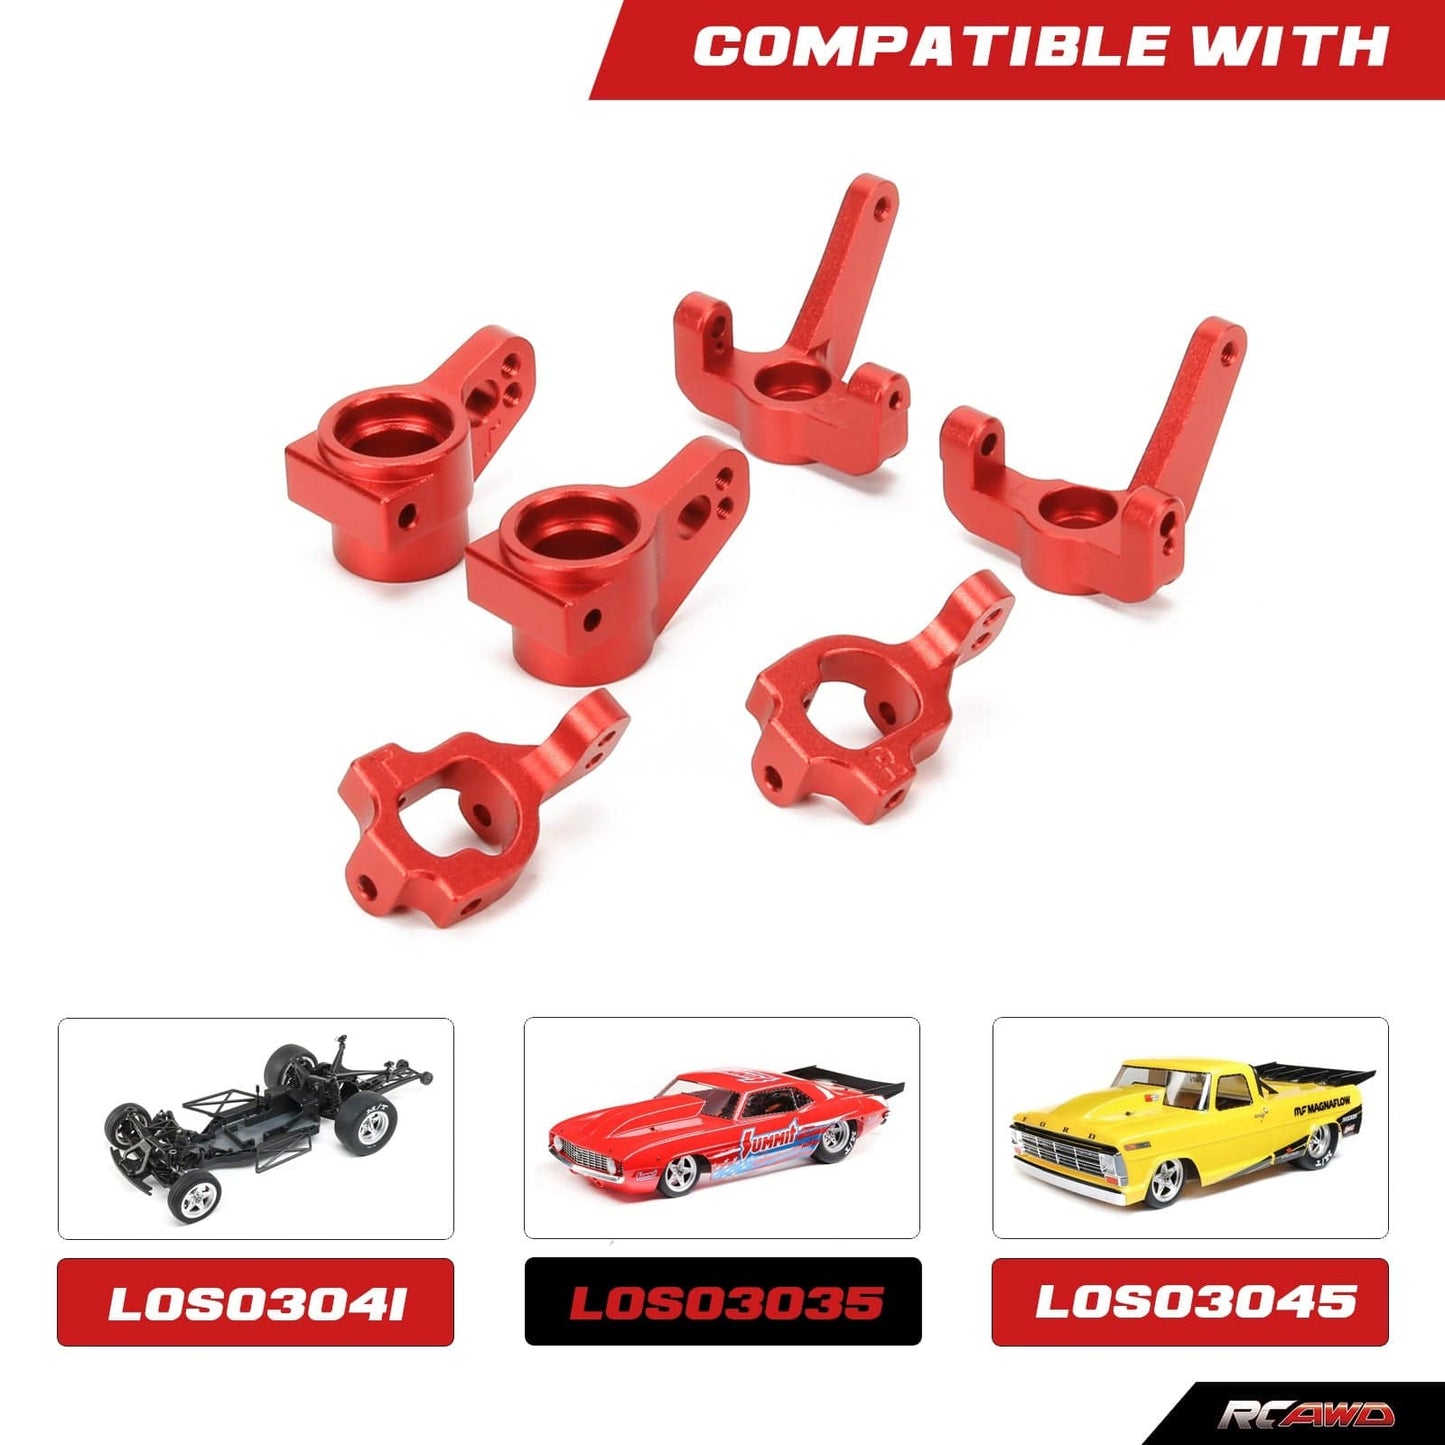 RCAWD Losi 22S RCAWD Losi 22s Upgrades Caster Block & Rear Hub & Front Spindle Set for Camaro